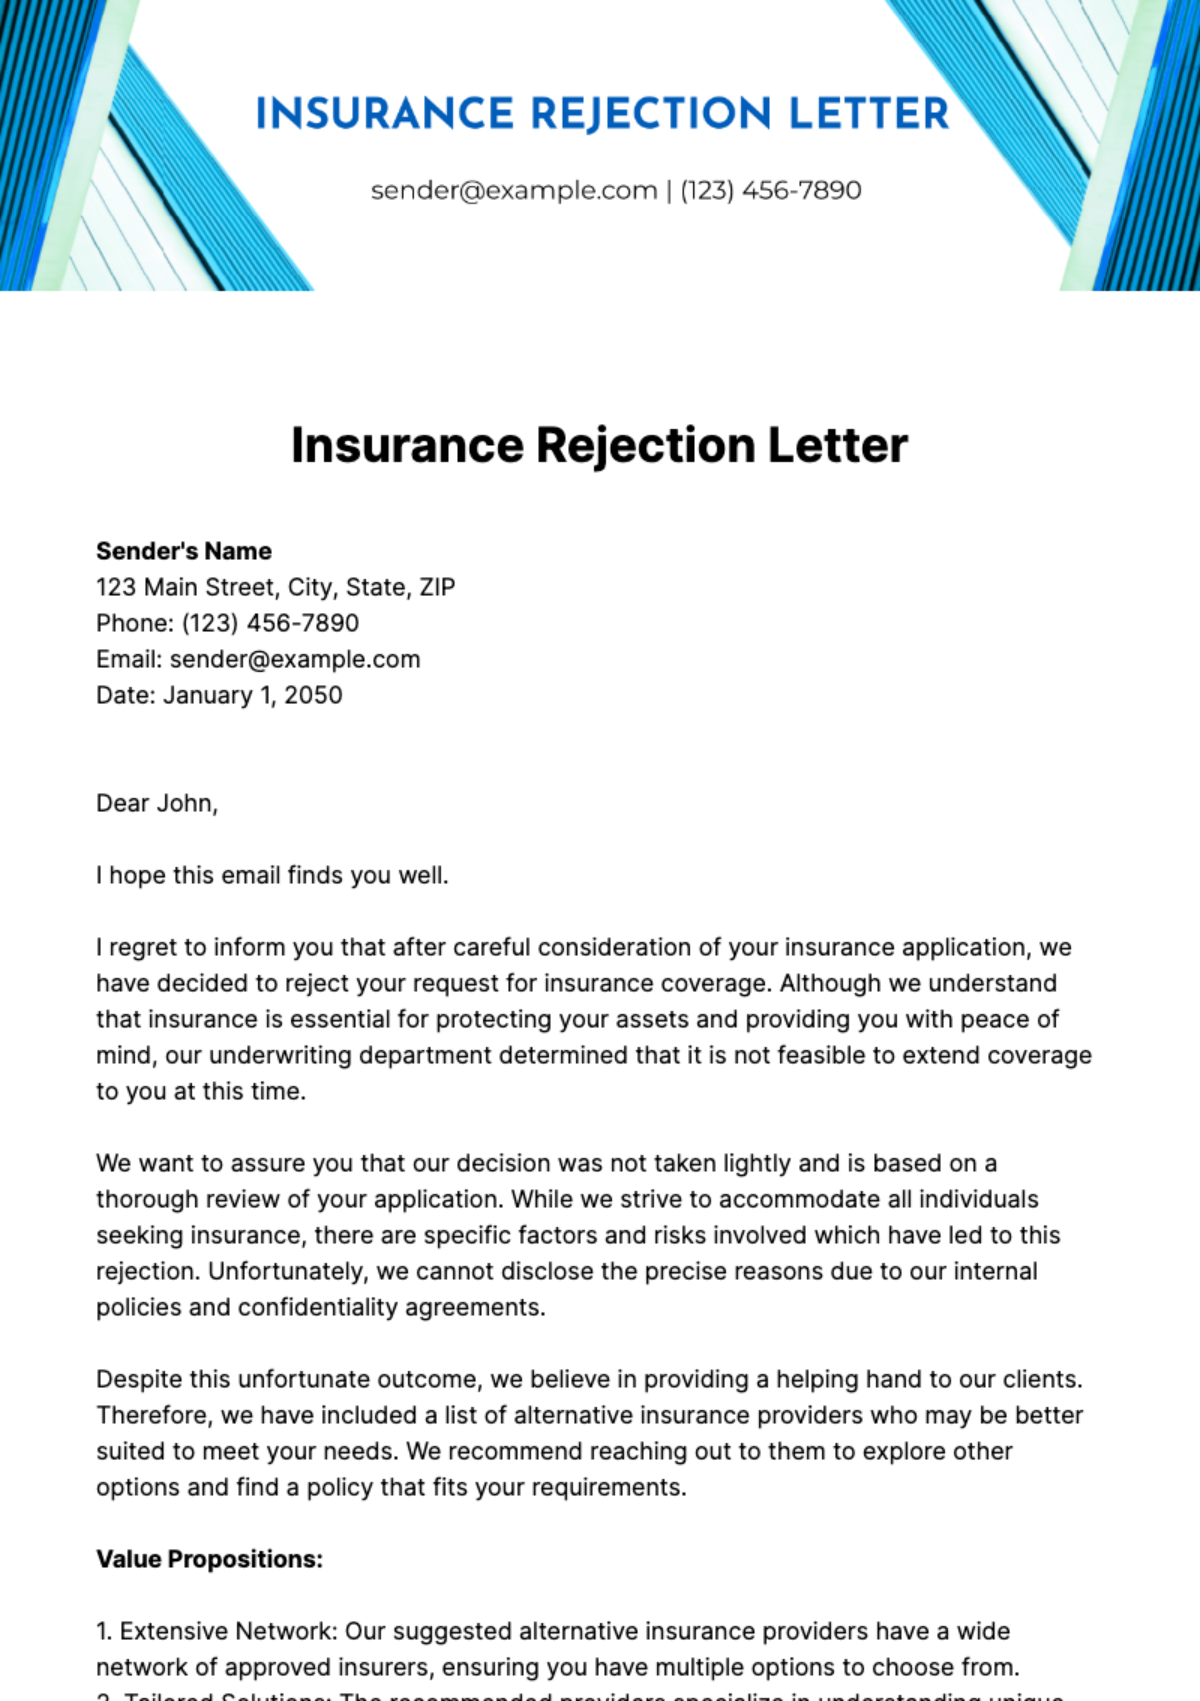 Insurance Rejection Letter Template